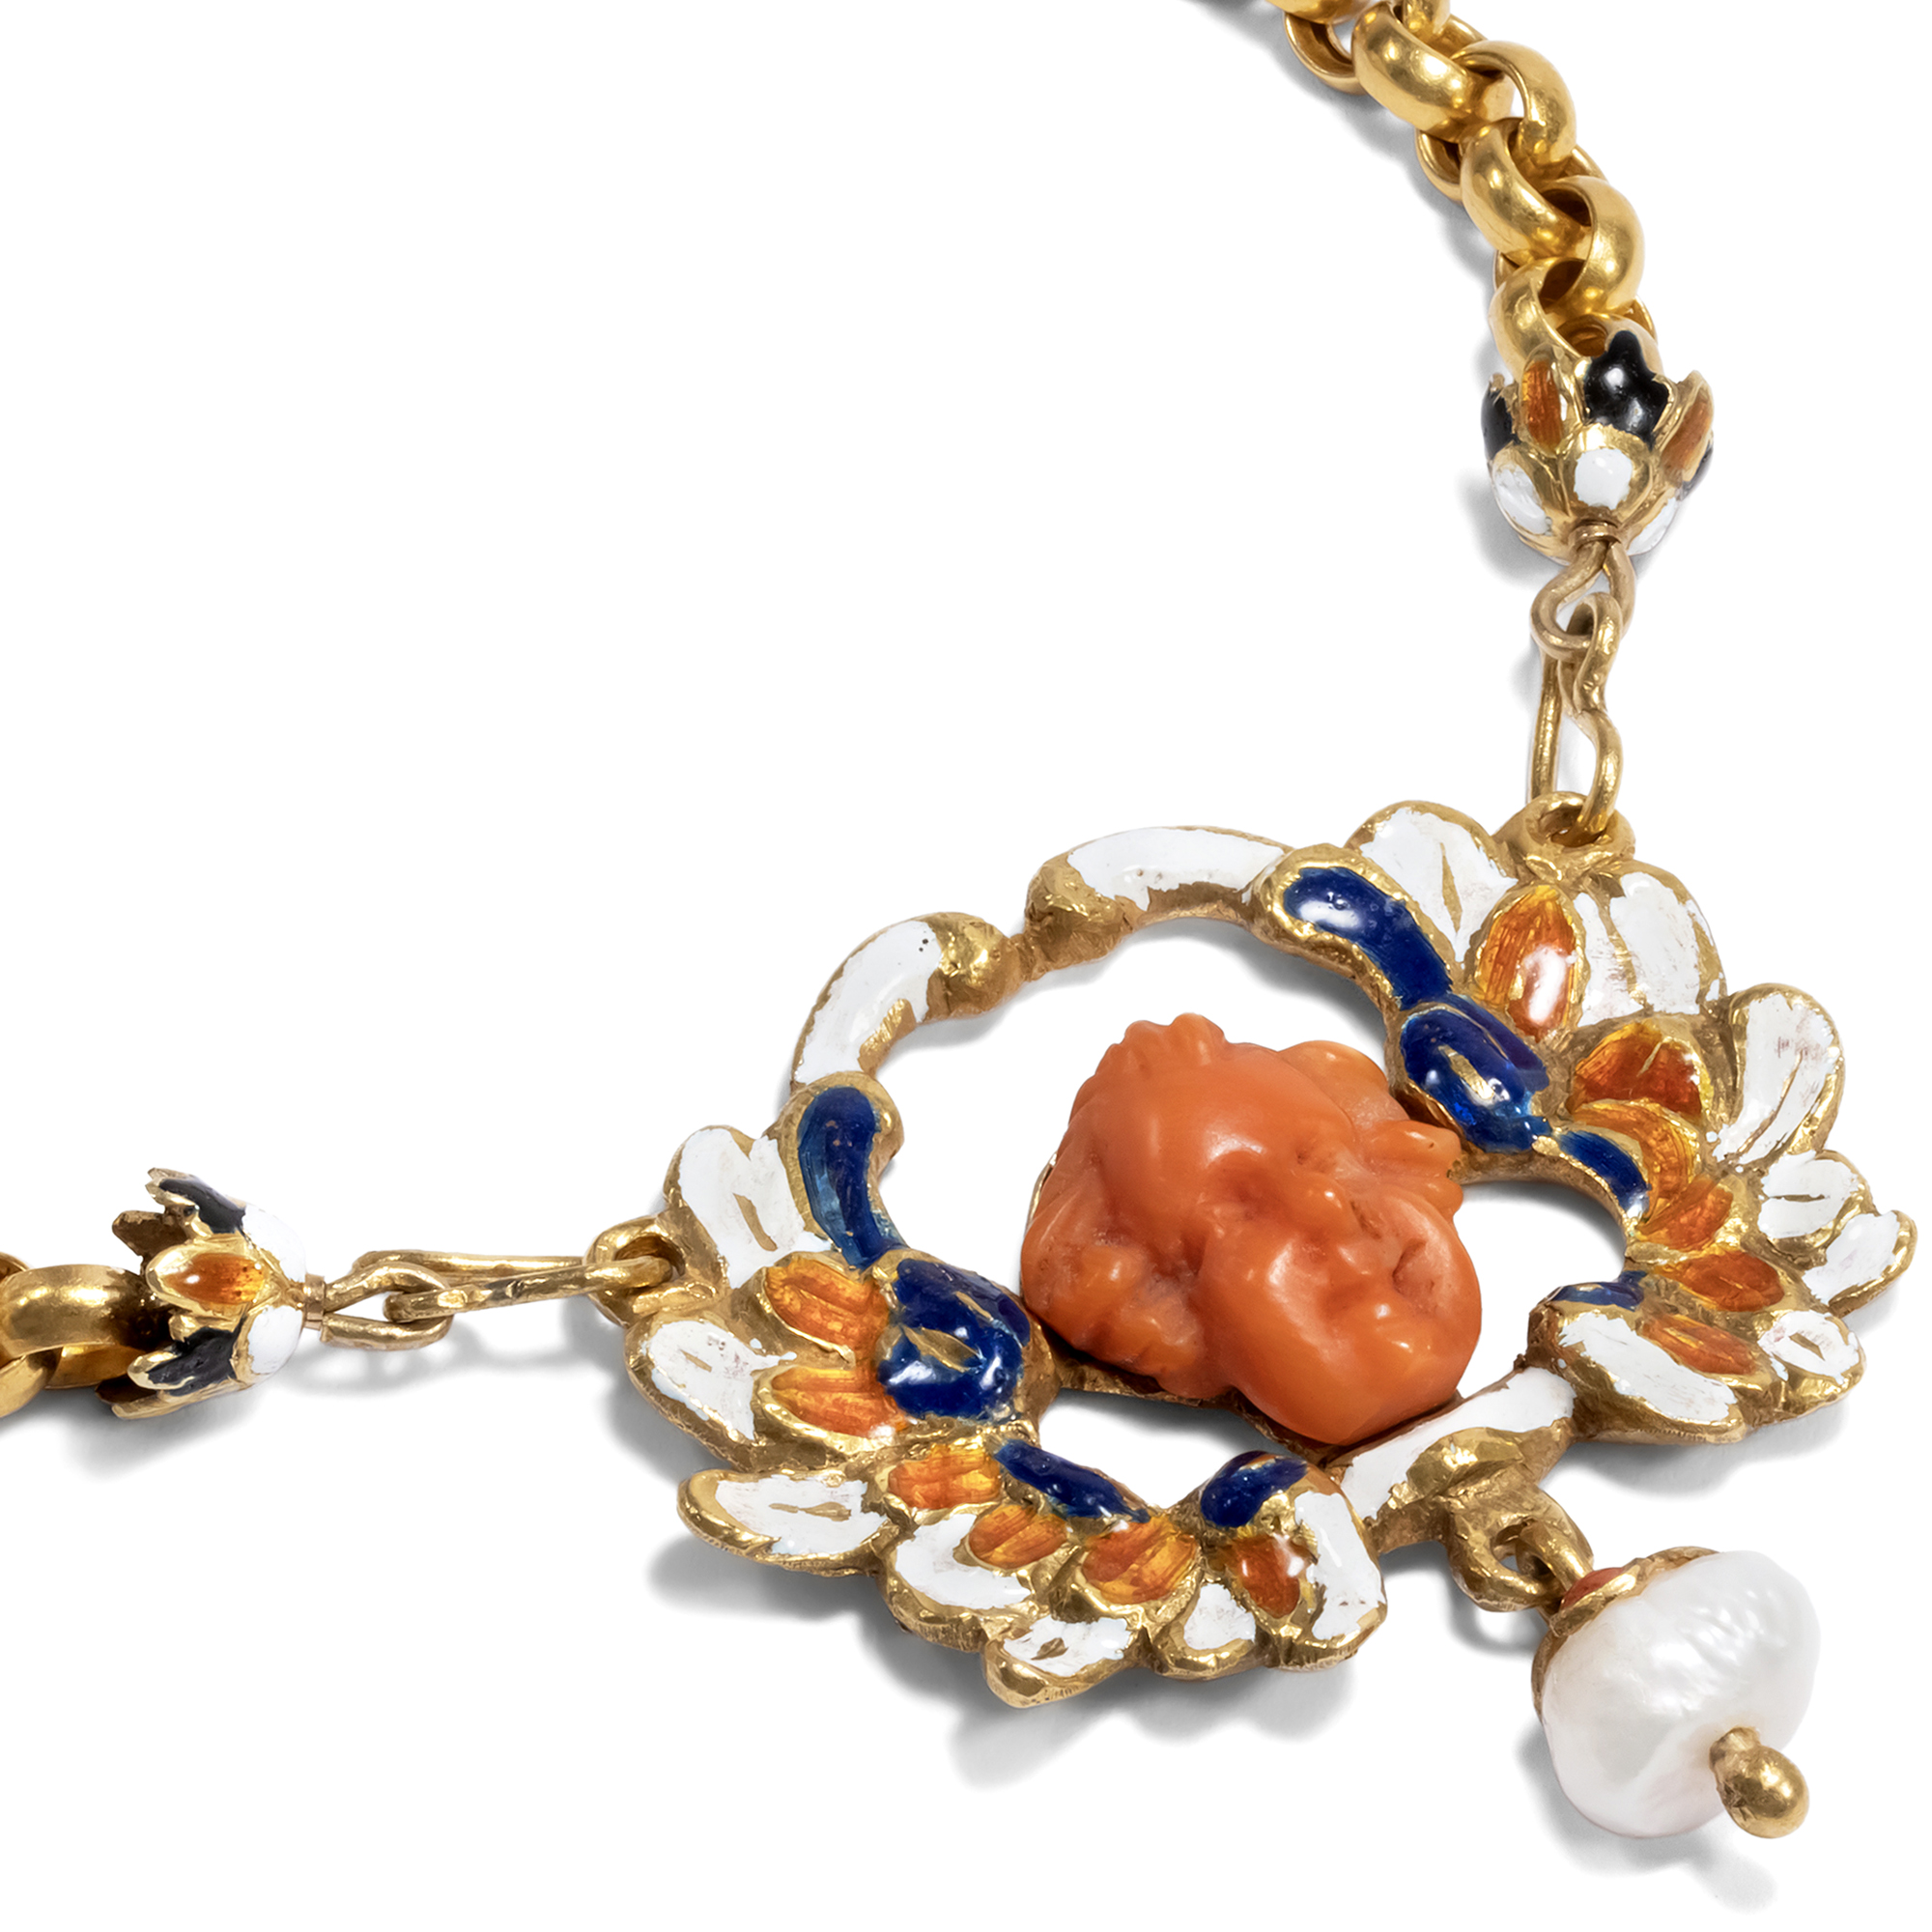 Genuine Coral Jewelry - Handmade earrings, necklace, pendants and bracelets  in coral and gold - The Coral Jewelry Sorrento